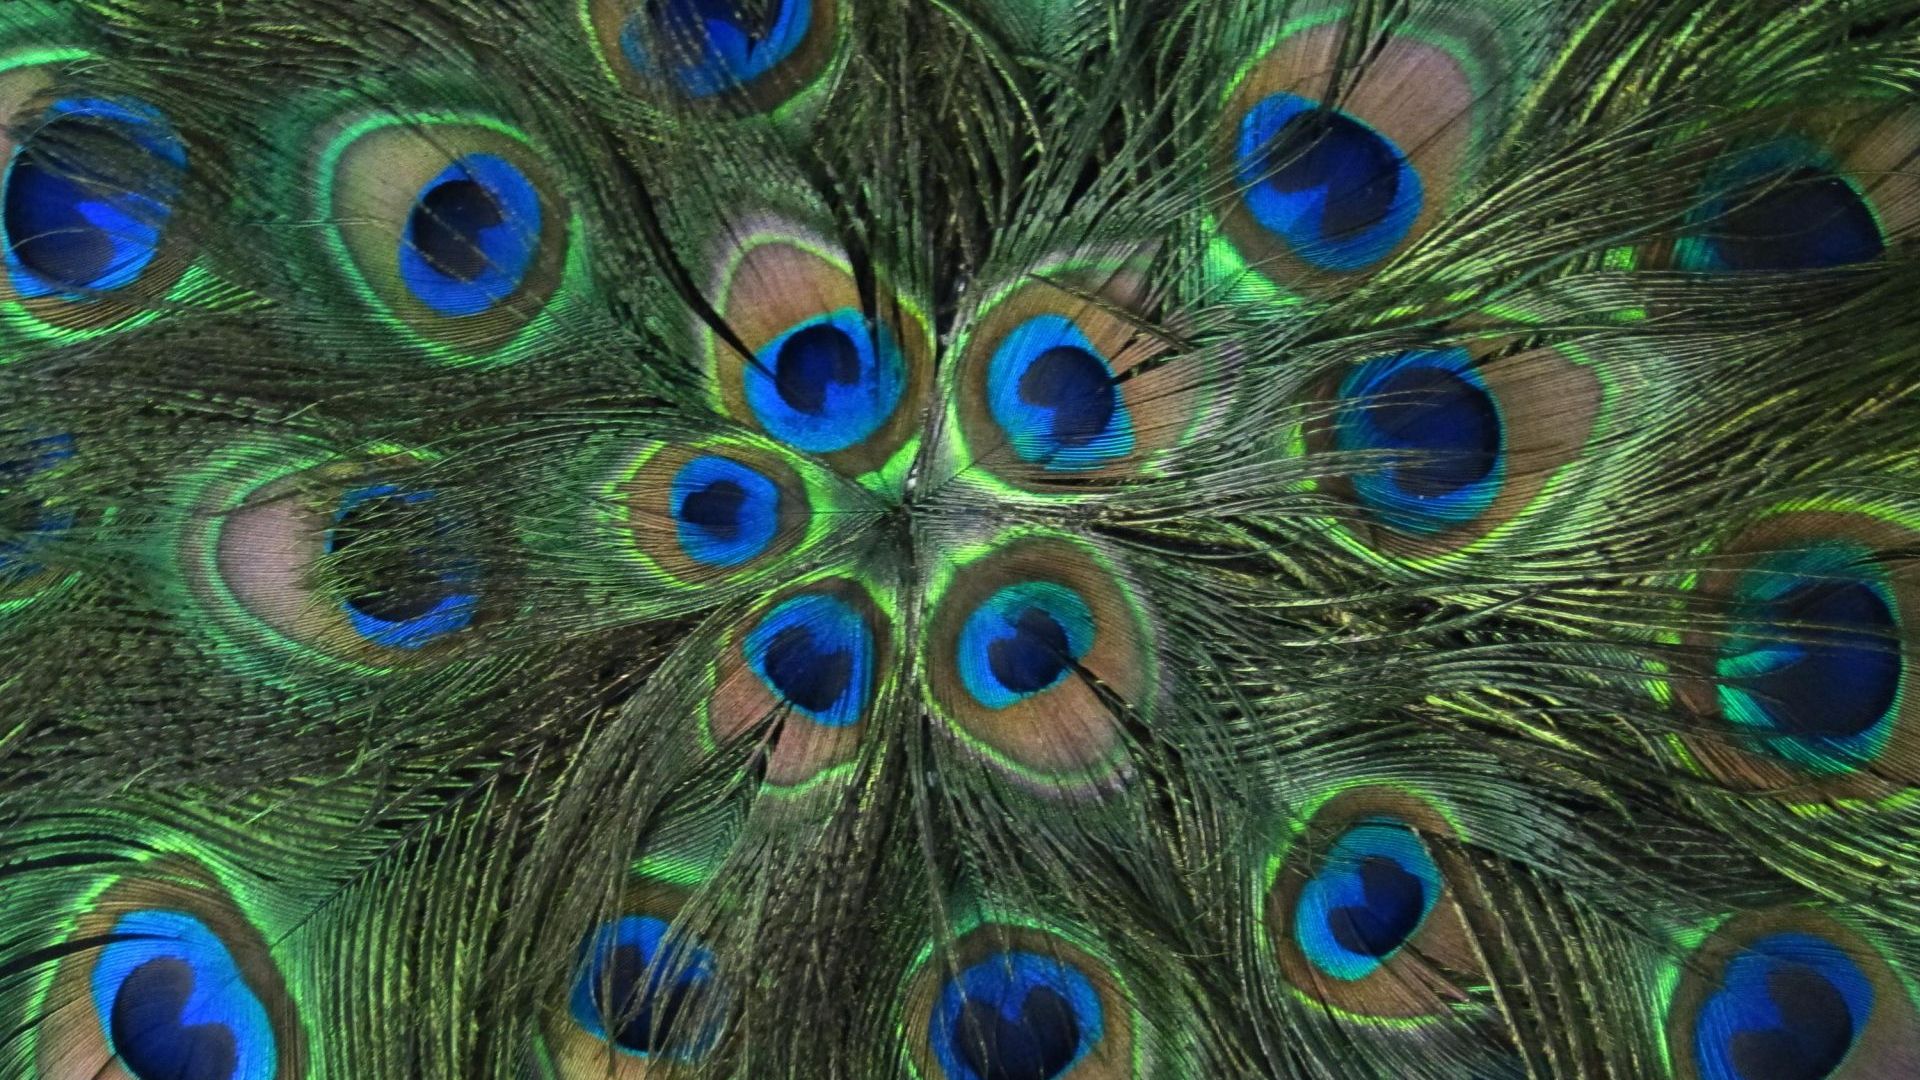 Desktop Wallpaper Colorful Feathers, Peacock Feathers, Hd Image, Picture,  Background, Zbscl7